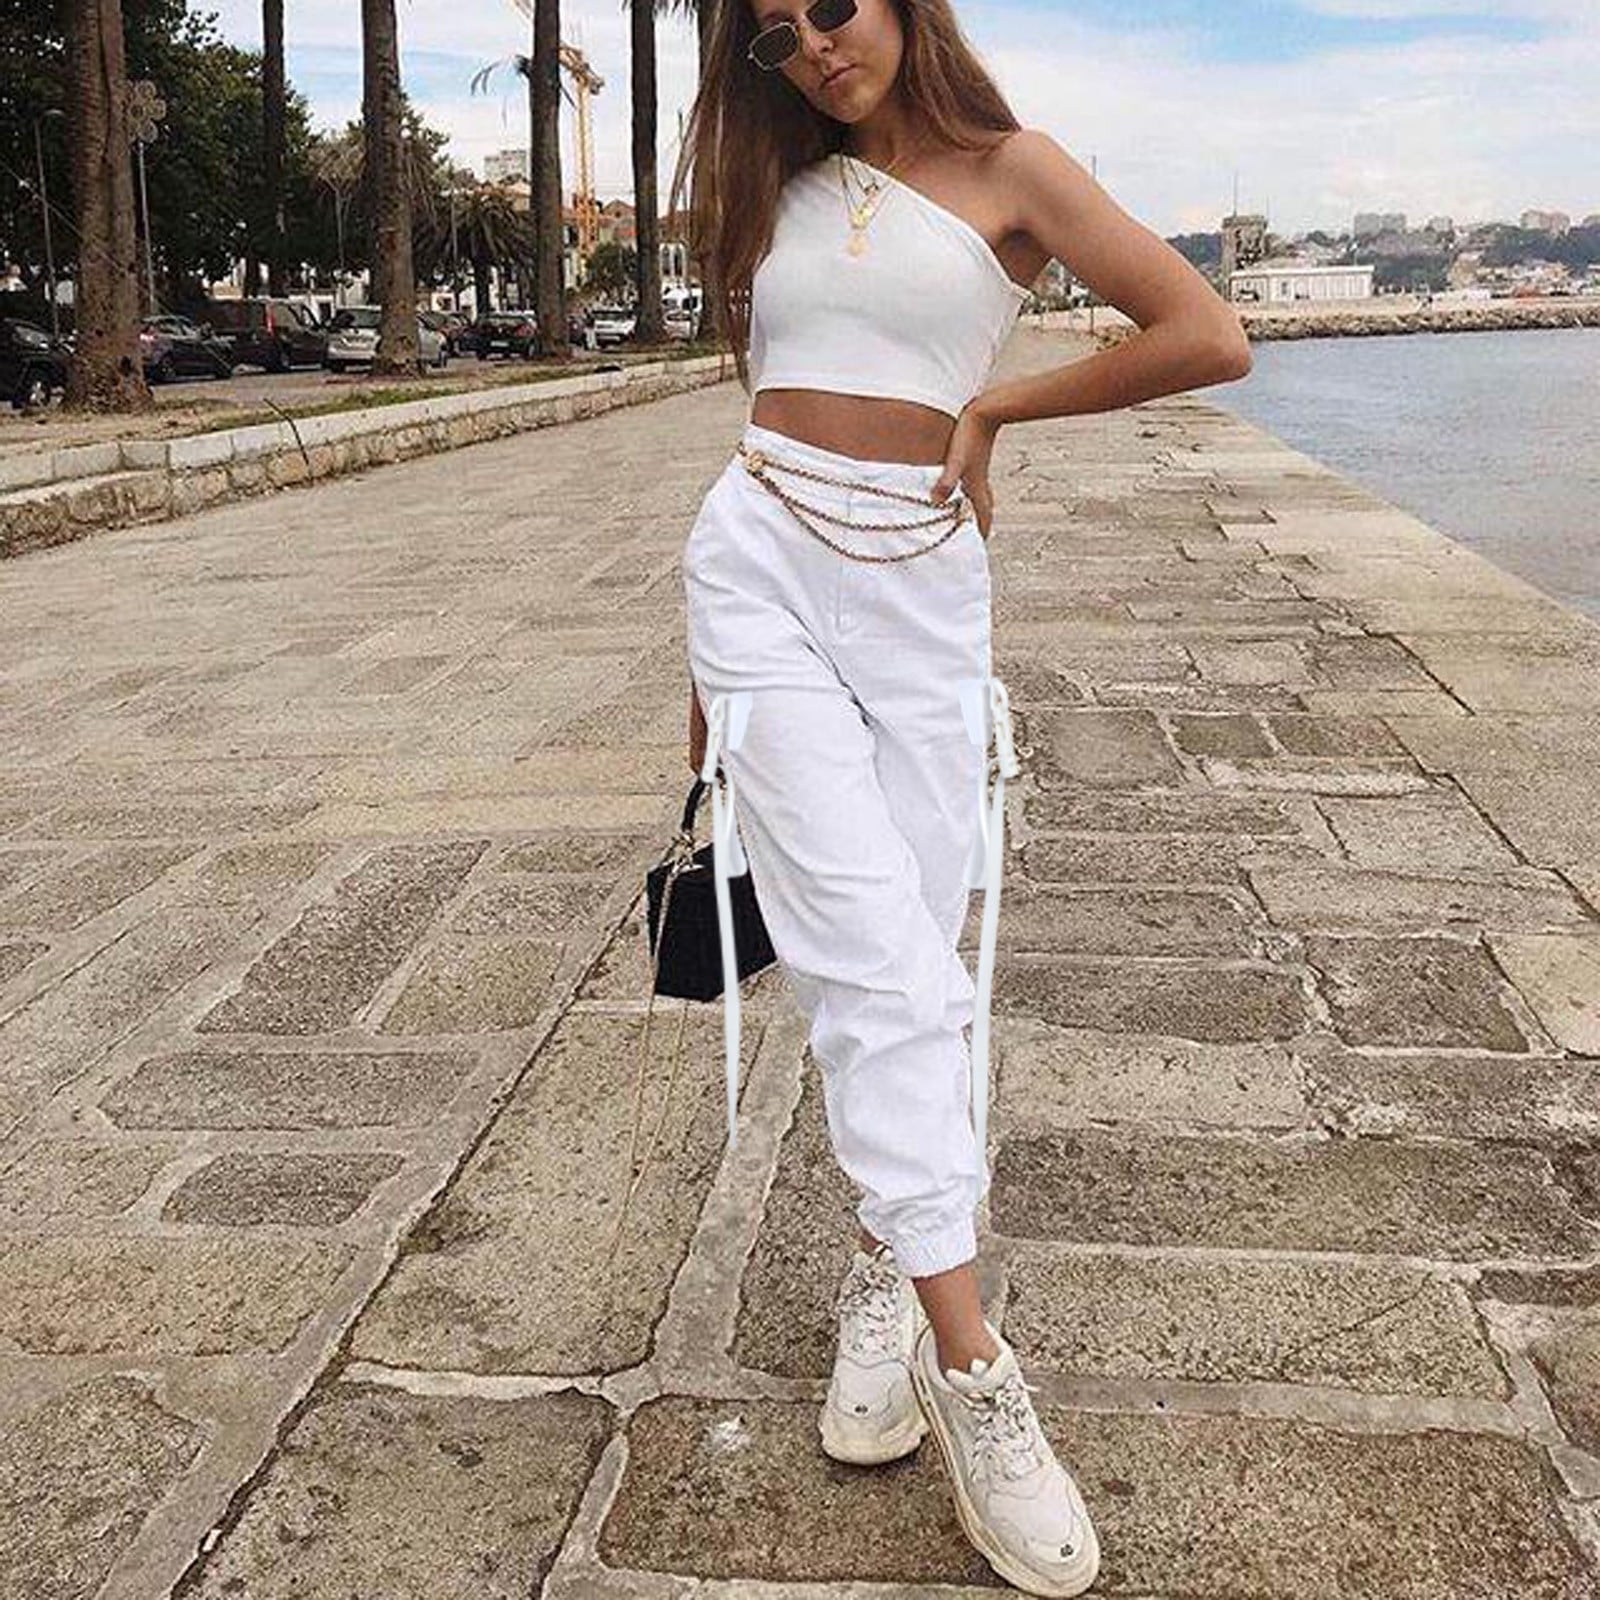 30 Outfit Ideas to Wear Cargo Pants in a Posh Way